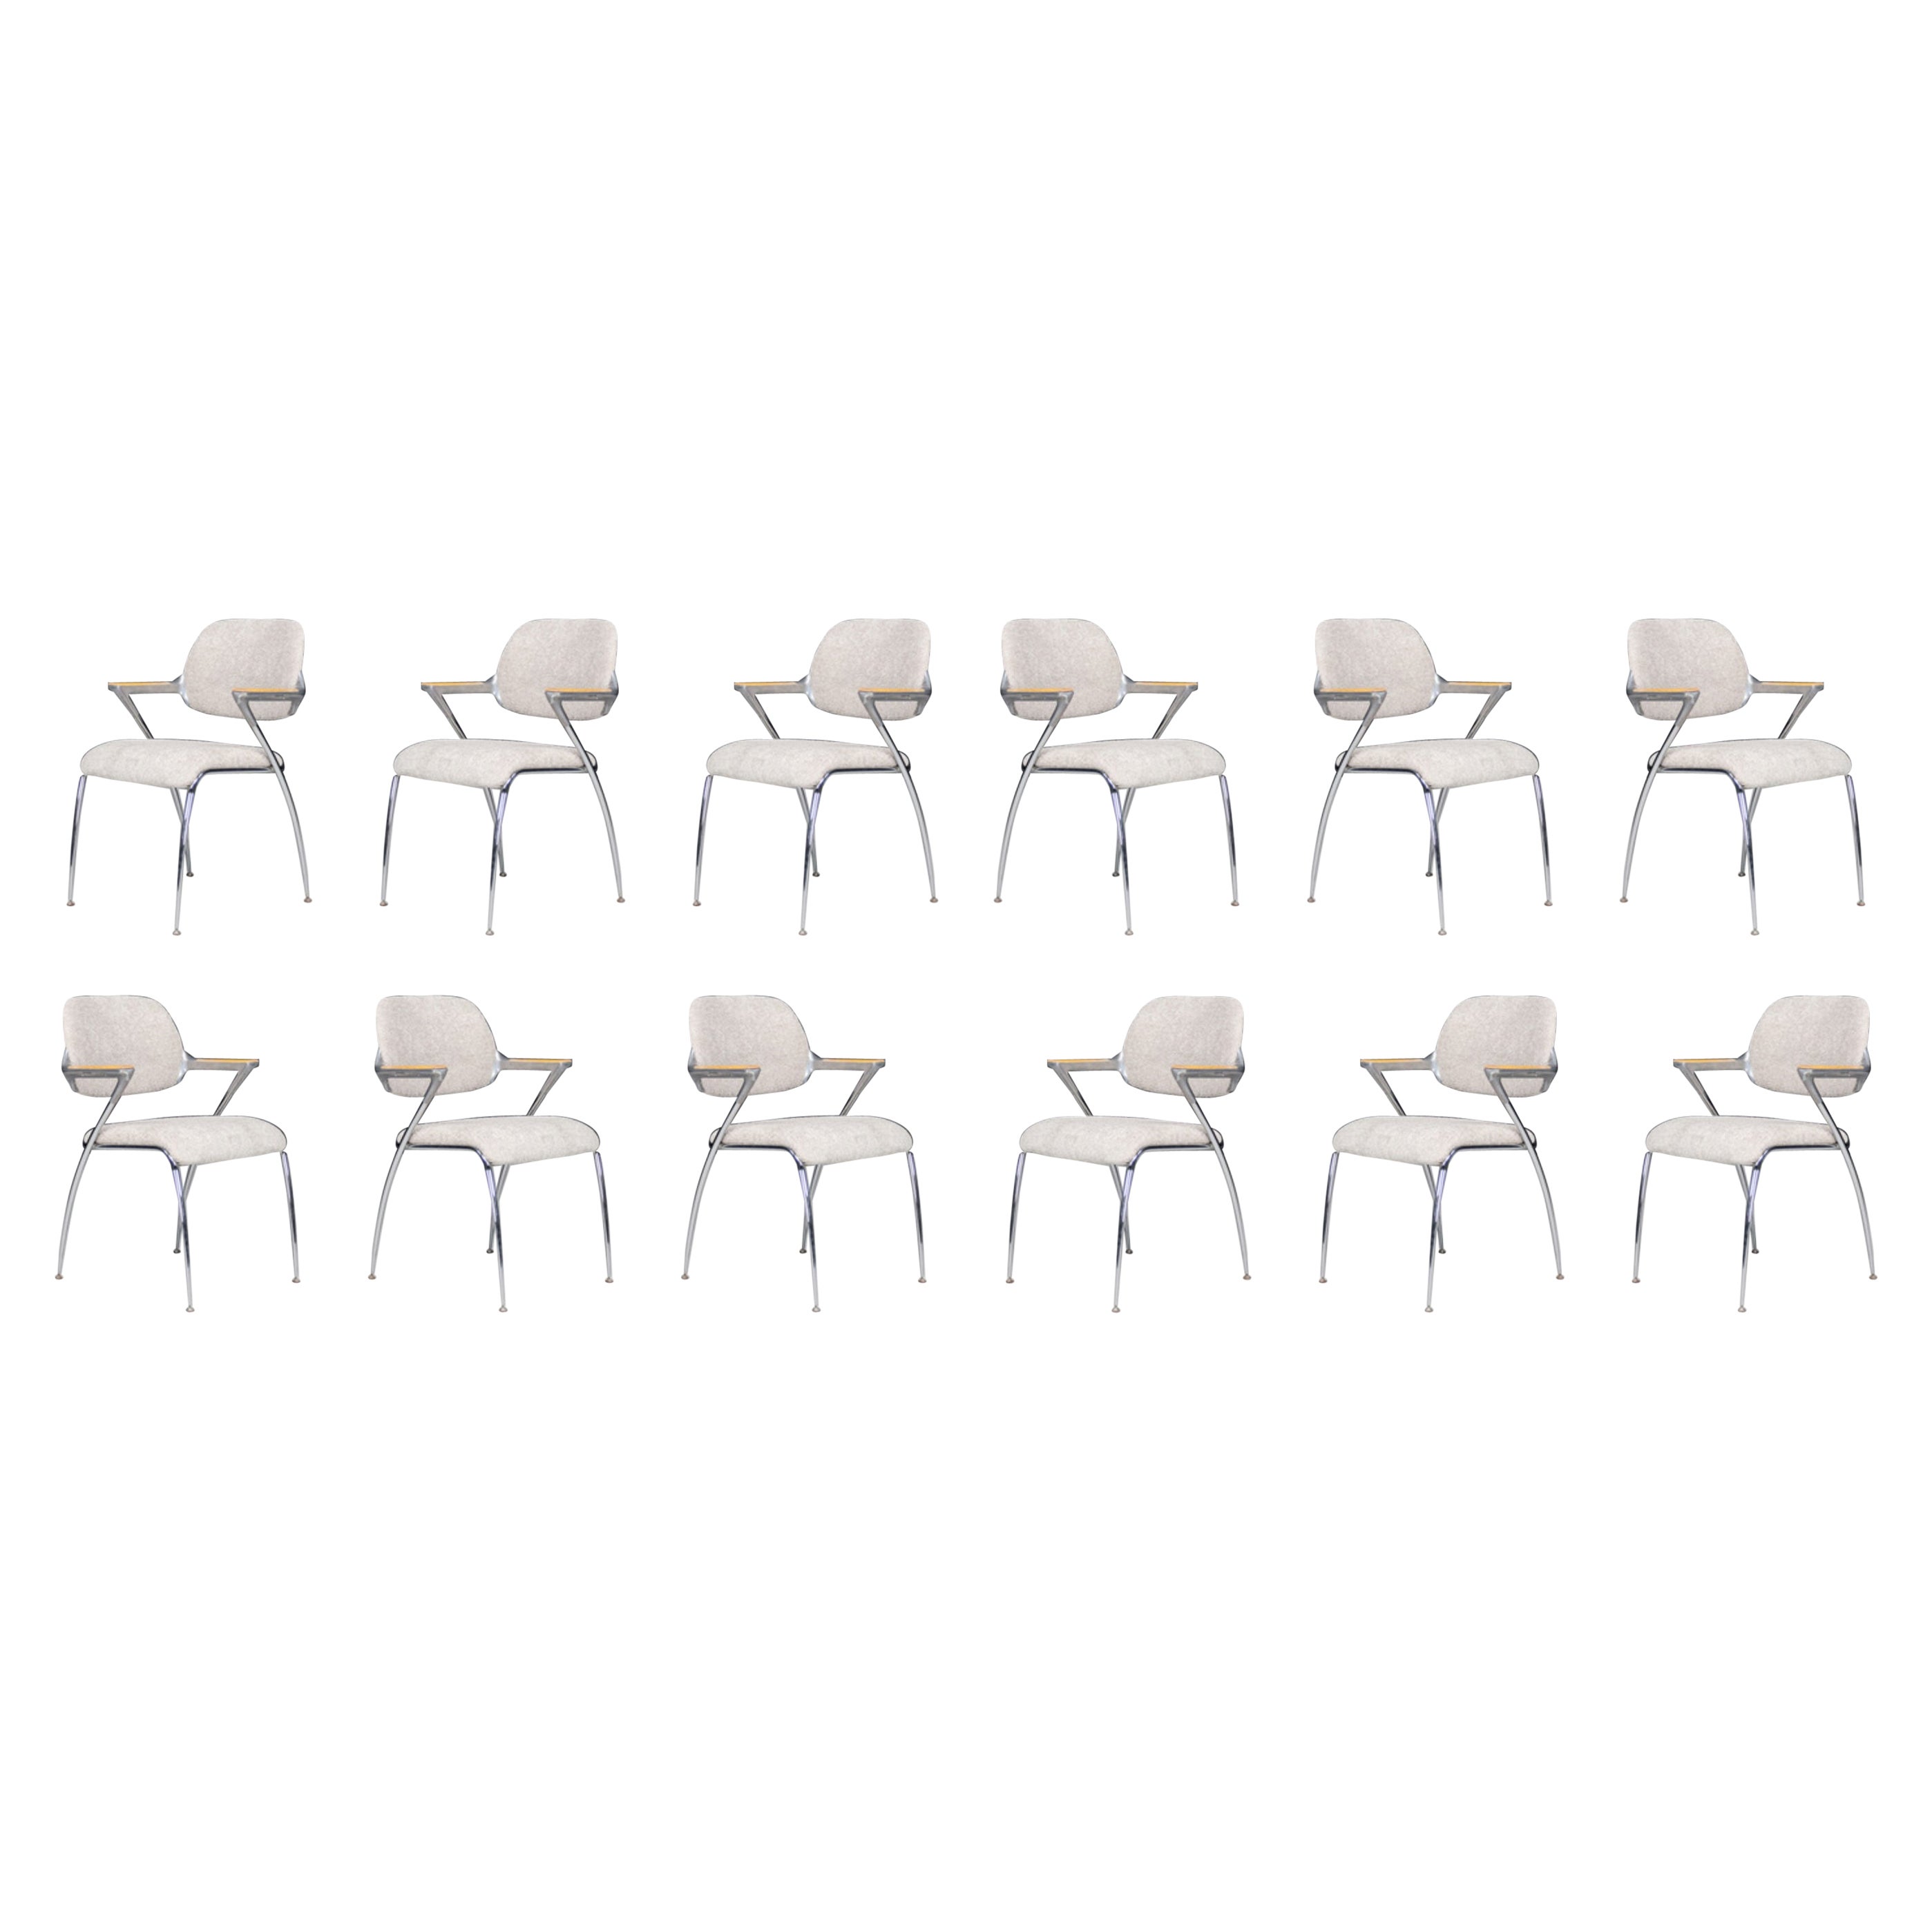 Francesco Zaccone for Thonet Golf Dining Chairs, Germany, 1970